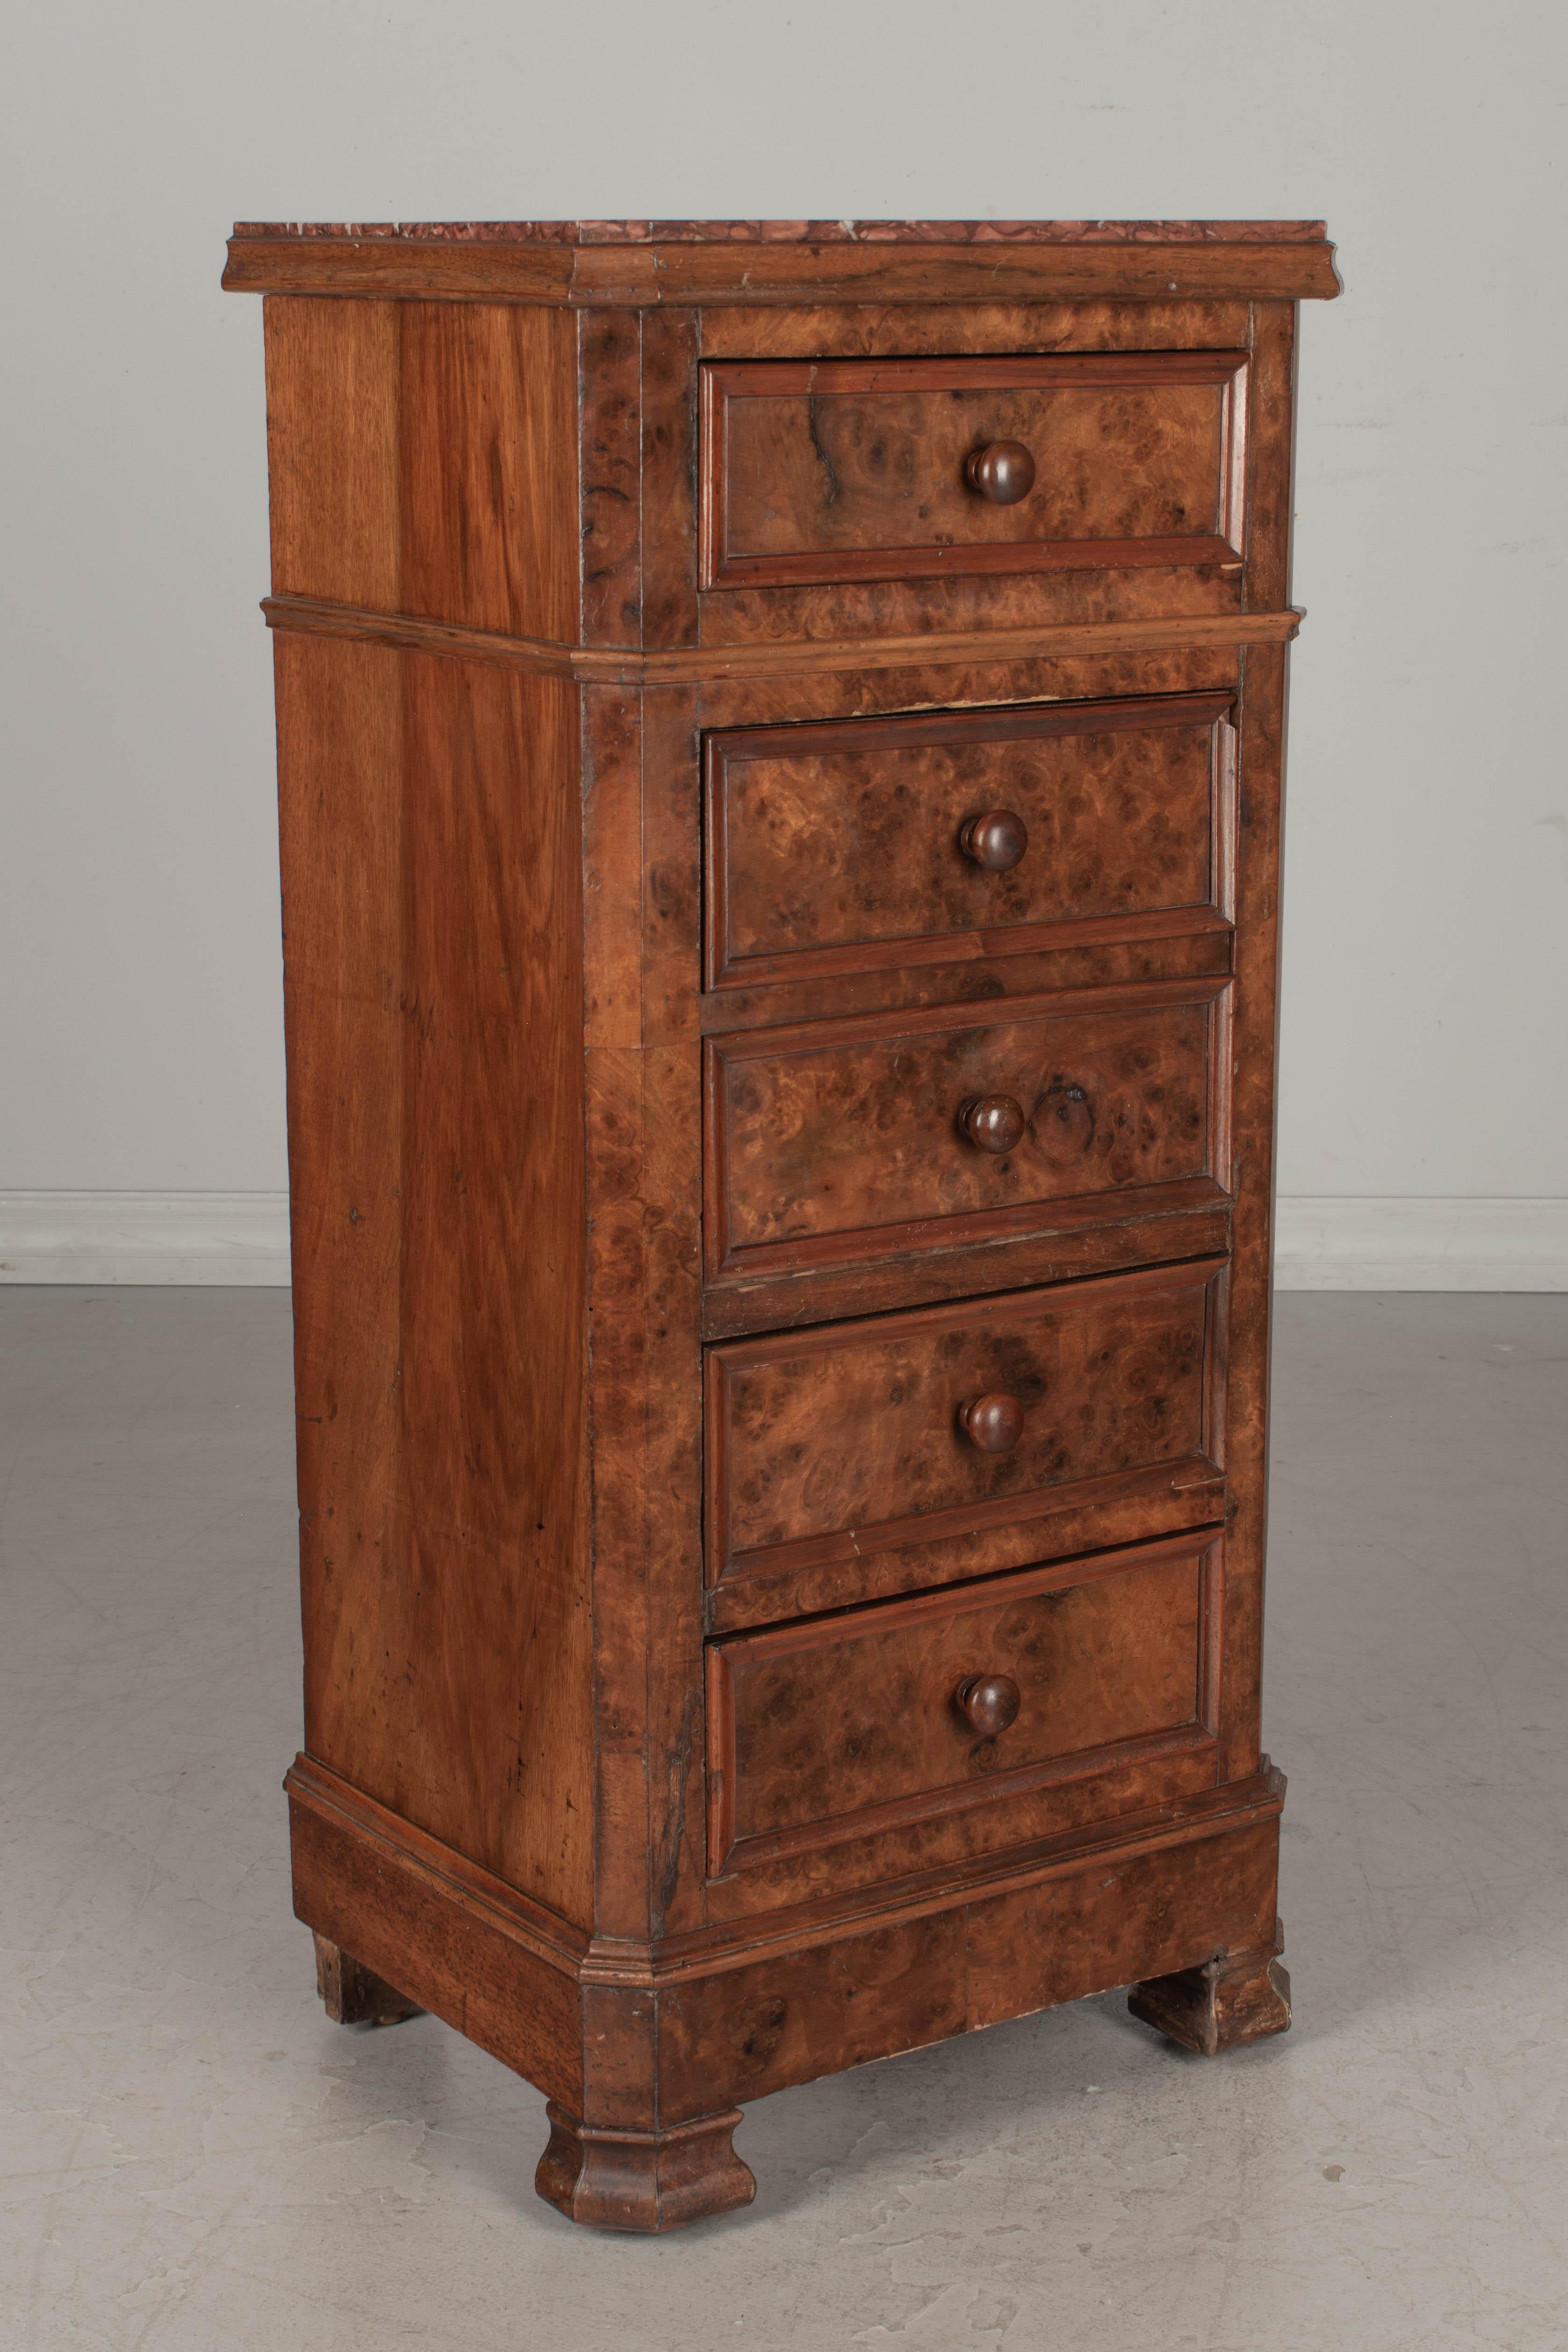 A 19th century French bedside table, or nightstand, made of walnut with veneer of burled walnut front. Three dovetailed drawers and a door that hinges open to reveal an interior compartment, once used to store a chamber pot. Original red veined